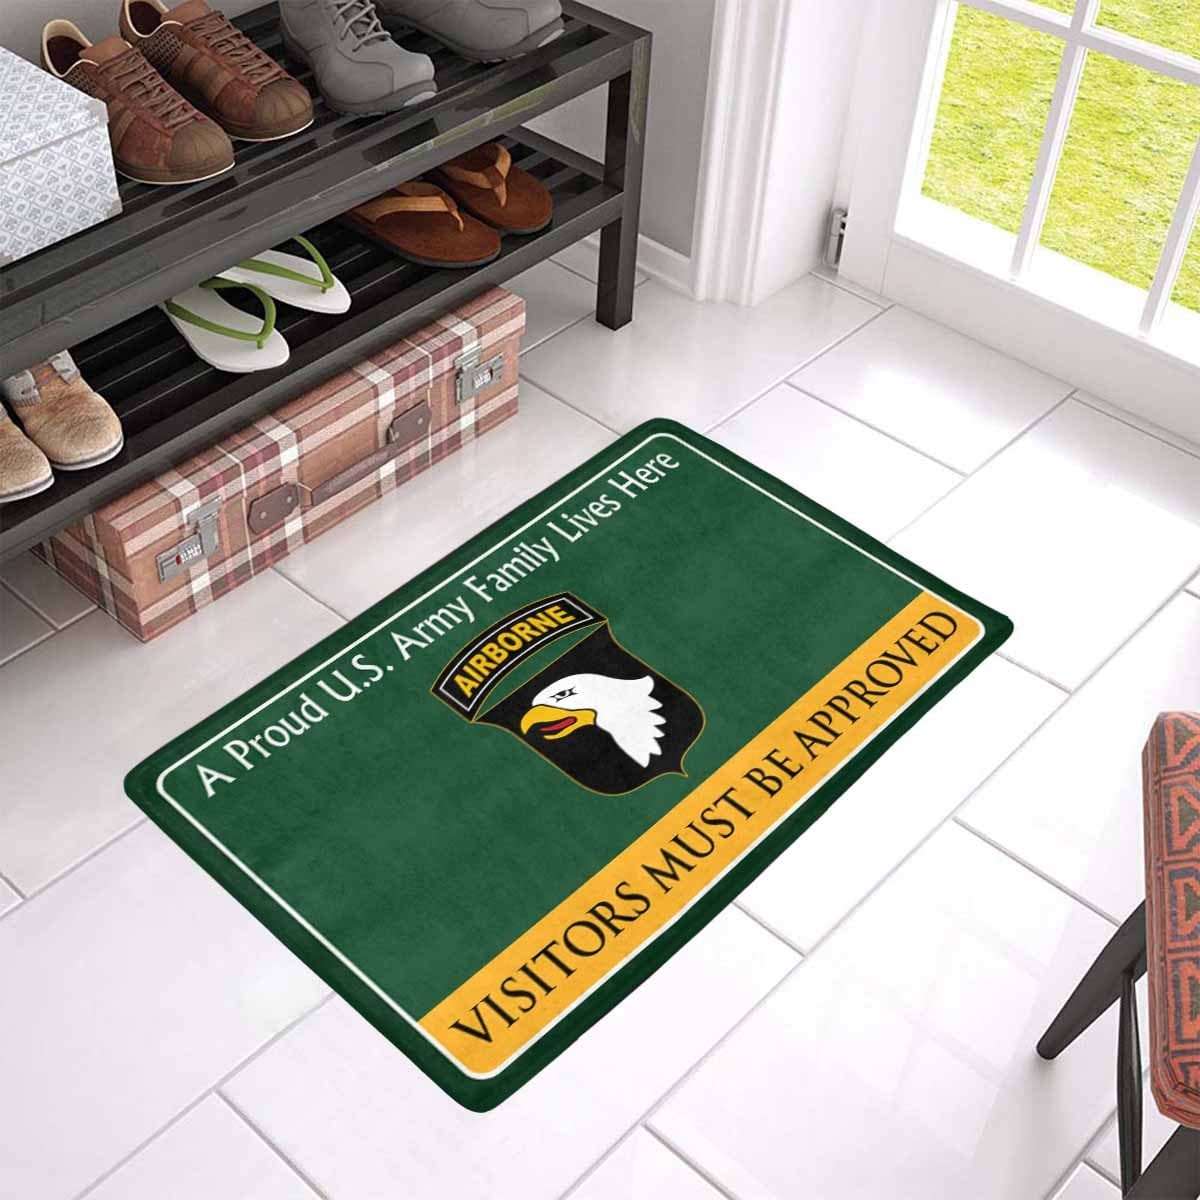 US Army 101st Airborne Division Family Doormat - Visitors must be approved Doormat (23.6 inches x 15.7 inches)-Doormat-Army-CSIB-Veterans Nation